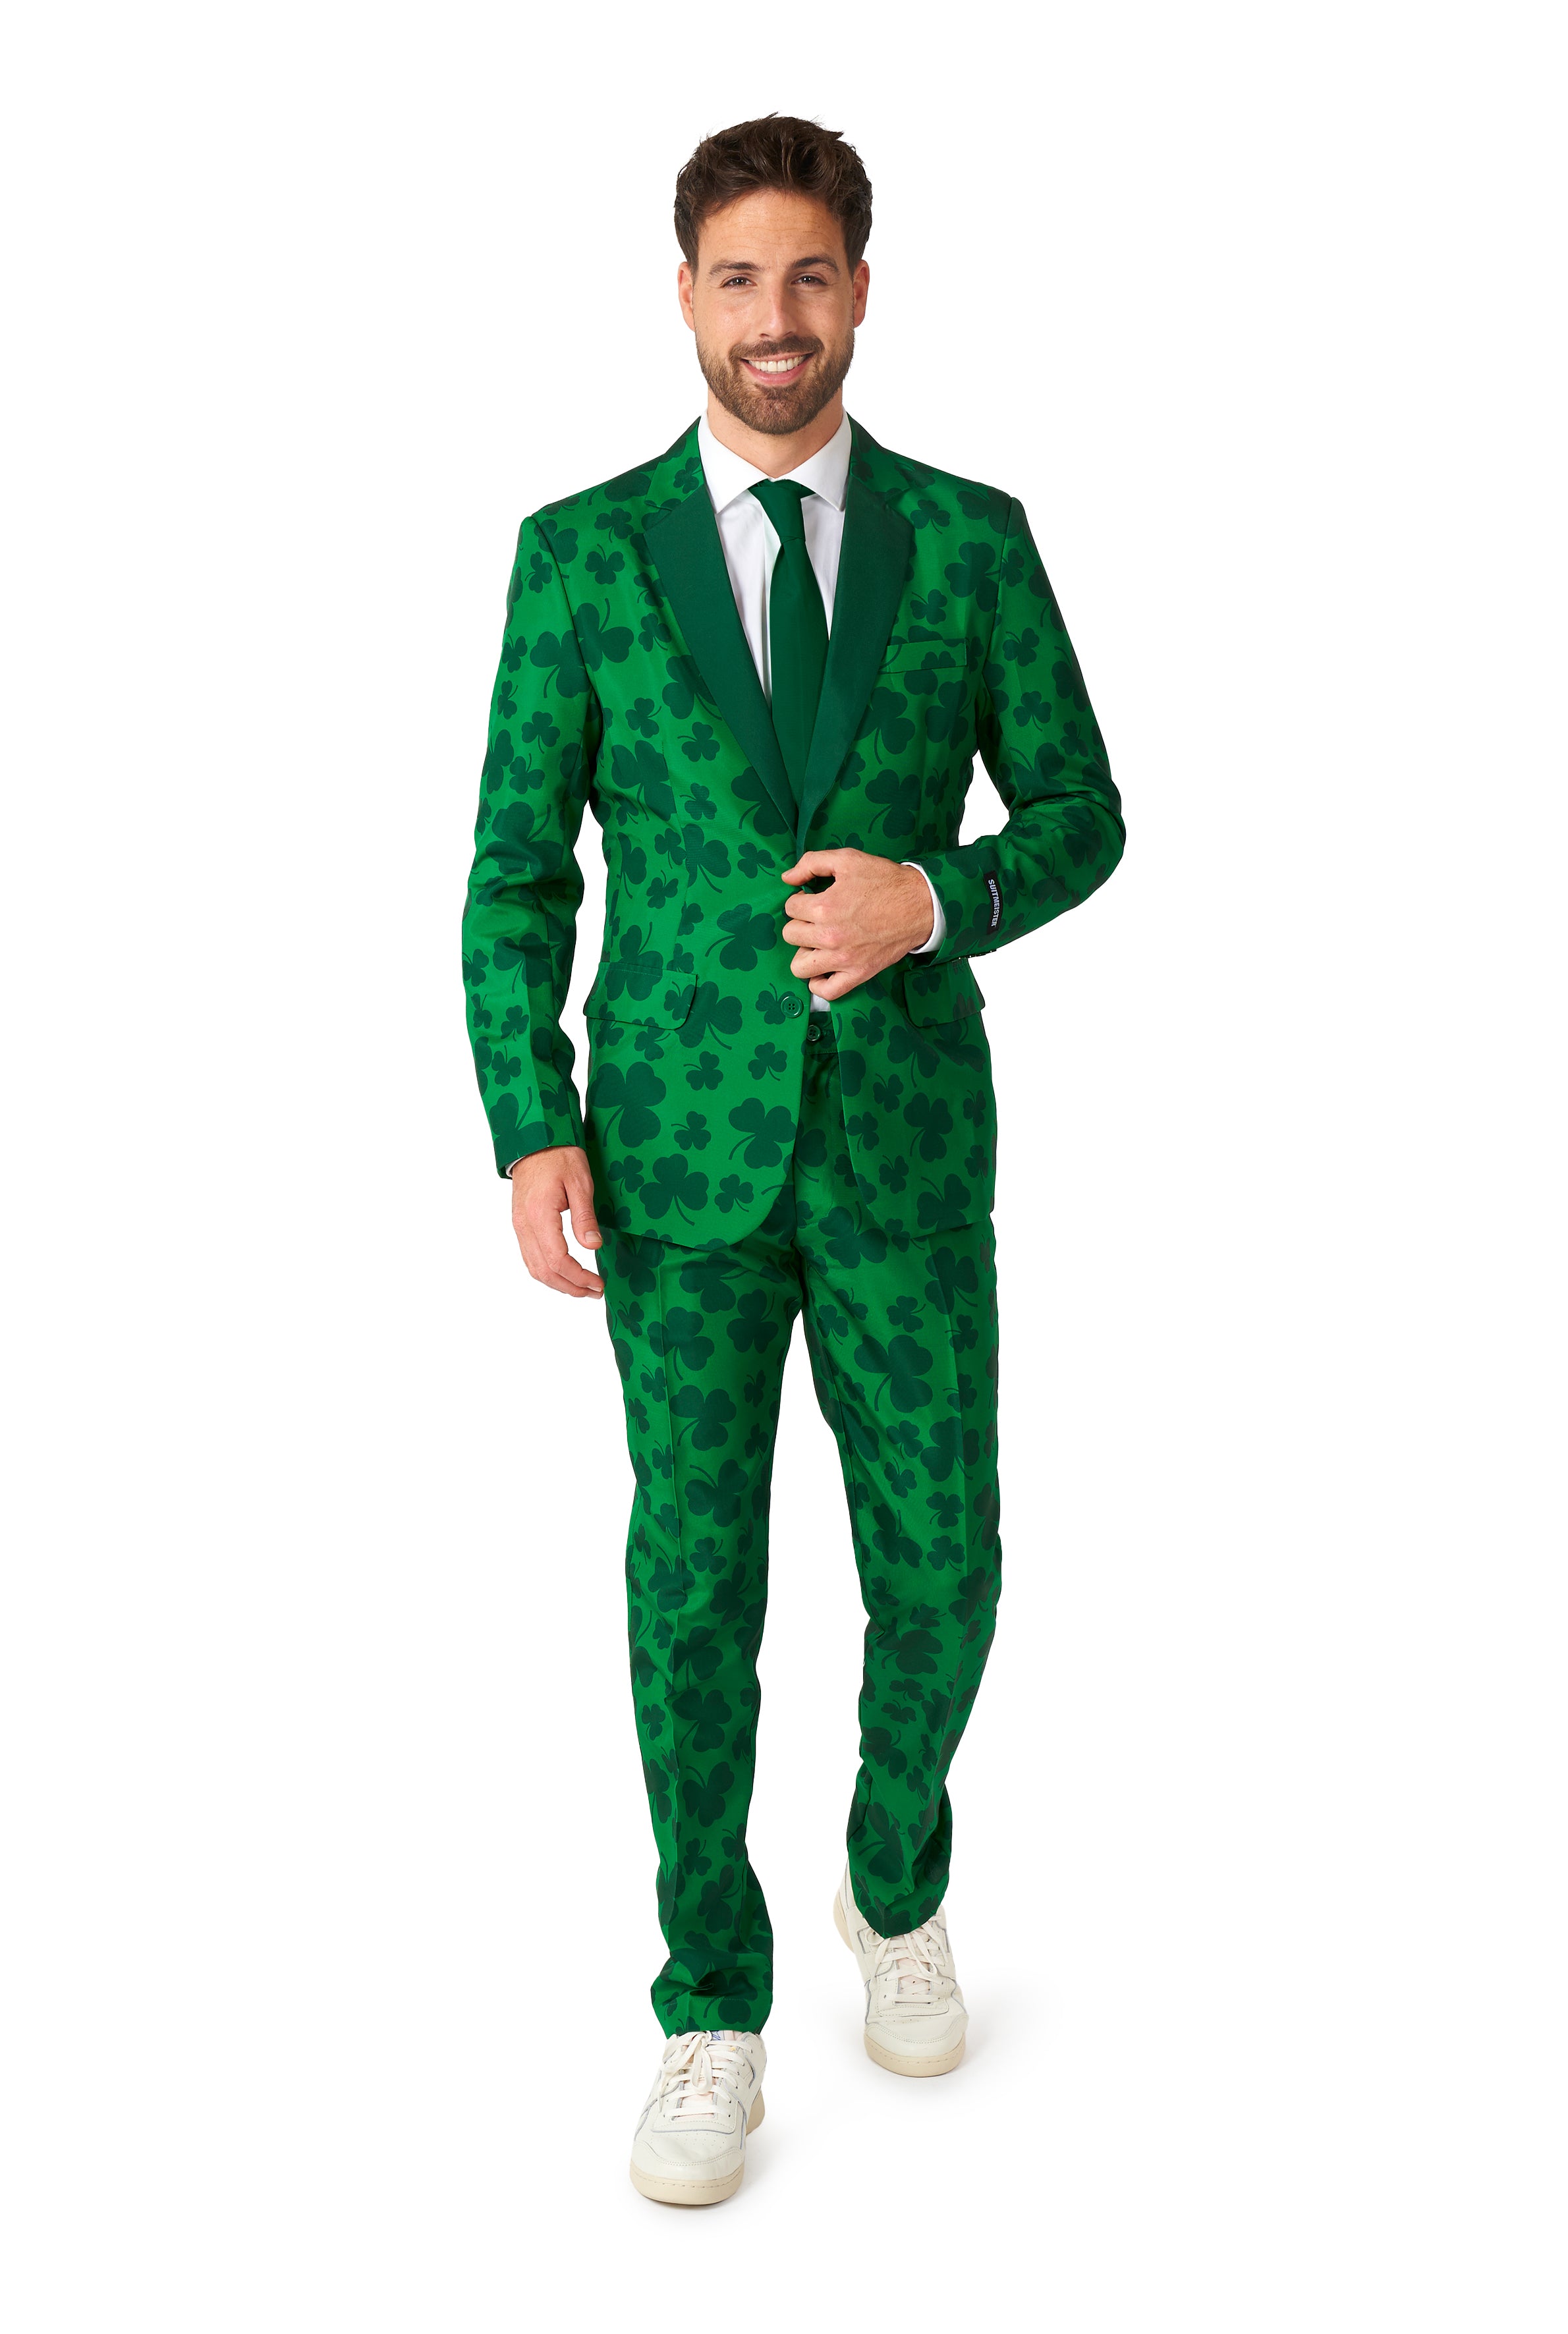 Costume Suitmeister St. Pats Green